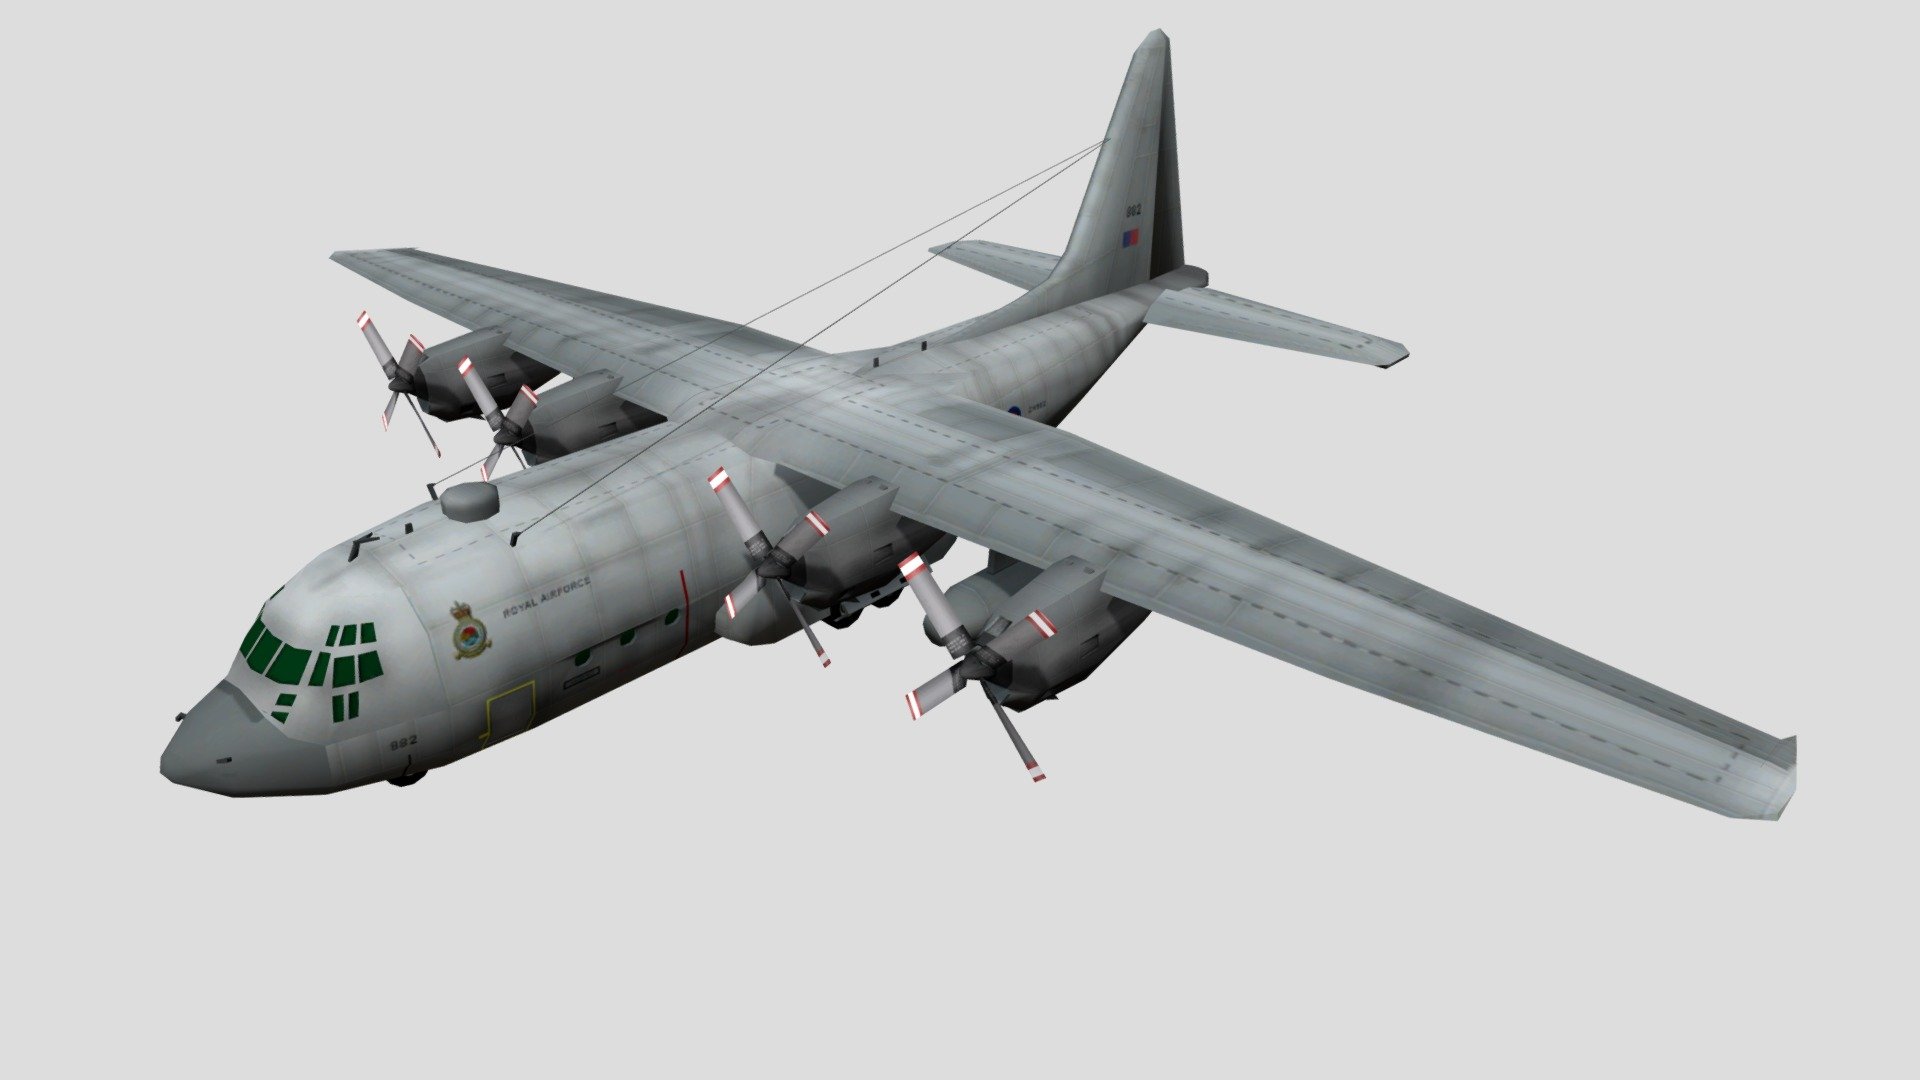 The Lockheed C-130 Hercules is an American four-engine turboprop military transport aircraft designed and built originally by Lockheed (now Lockheed Martin). Capable of using unprepared runways for takeoffs and landings, the C-130 was originally designed as a troop, medevac, and cargo transport aircraft. The versatile airframe has found uses in a variety of other roles, including as a gunship (AC-130), for airborne assault, search and rescue, scientific research support, weather reconnaissance, aerial refueling, maritime patrol, and aerial firefighting. It is now the main tactical airlifter for many military forces worldwide. More than 40 variants of the Hercules, including civilian versions marketed as the Lockheed L-100, operate in more than 60 nations 3d model